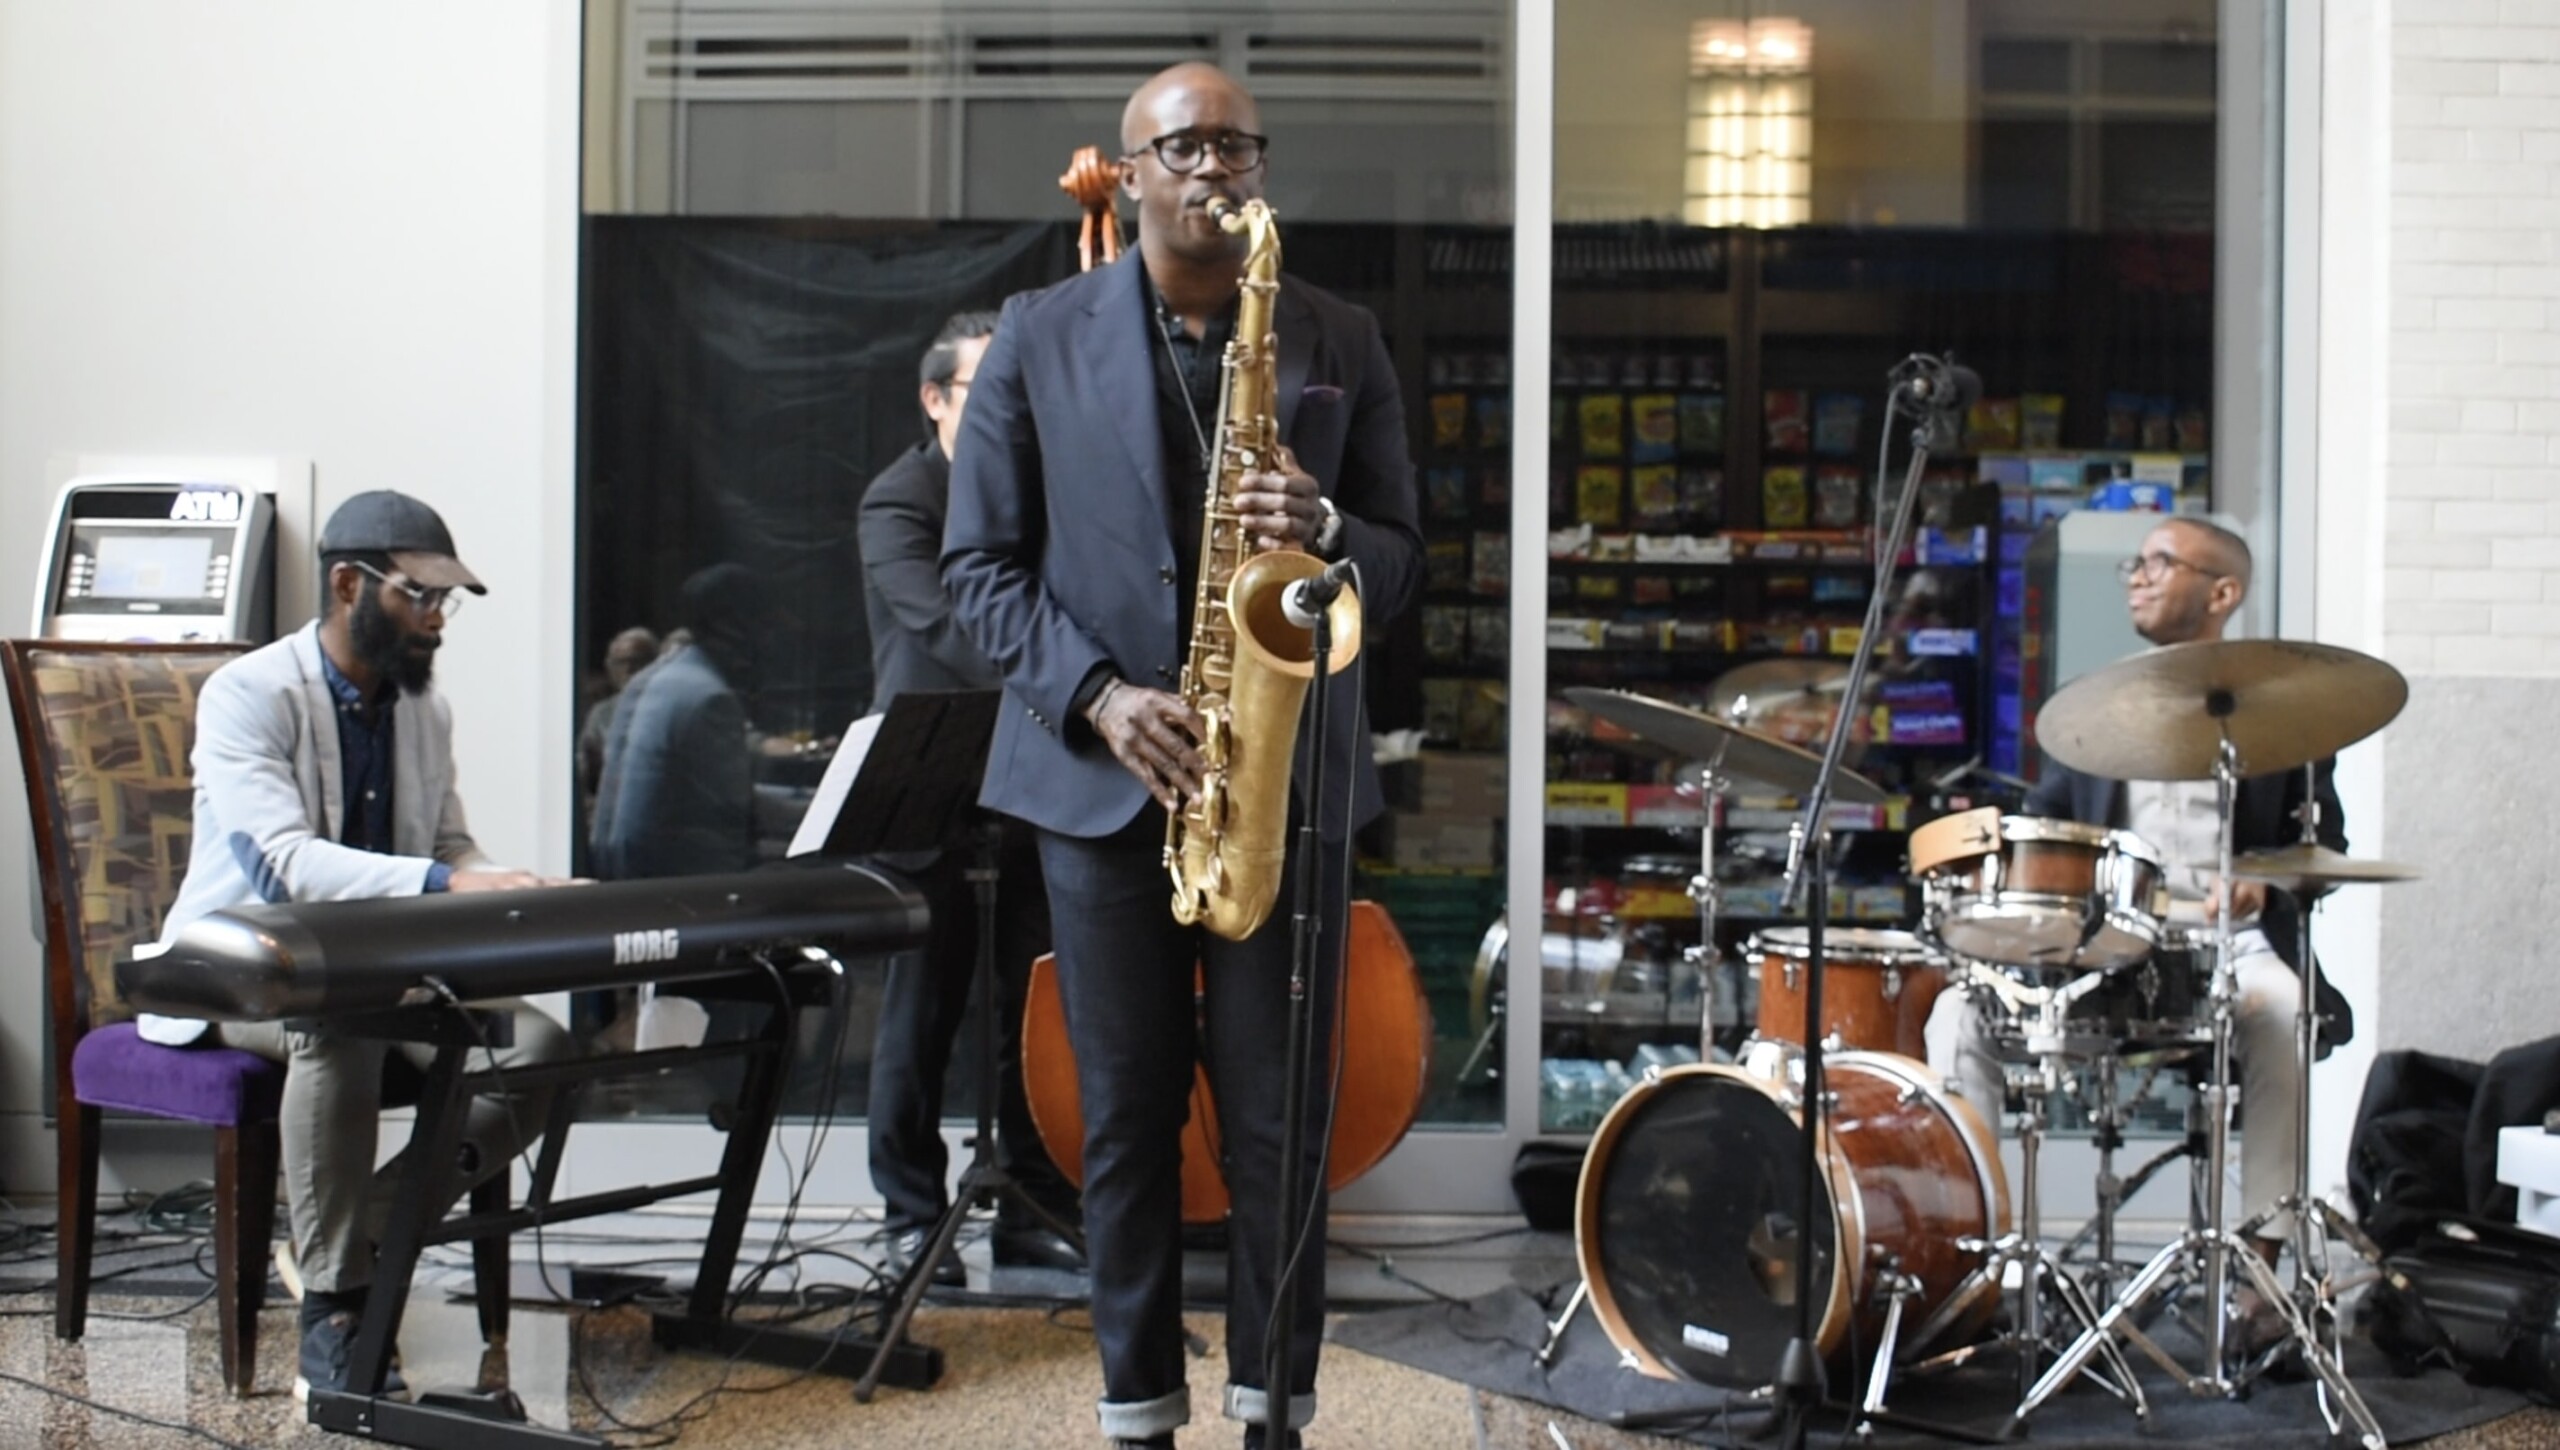 The Gregory Groover Jr. Jazz Quartet perform at day one of the Embrace Ideas Festival. - King Boston Embrace Ideas Festival 2022